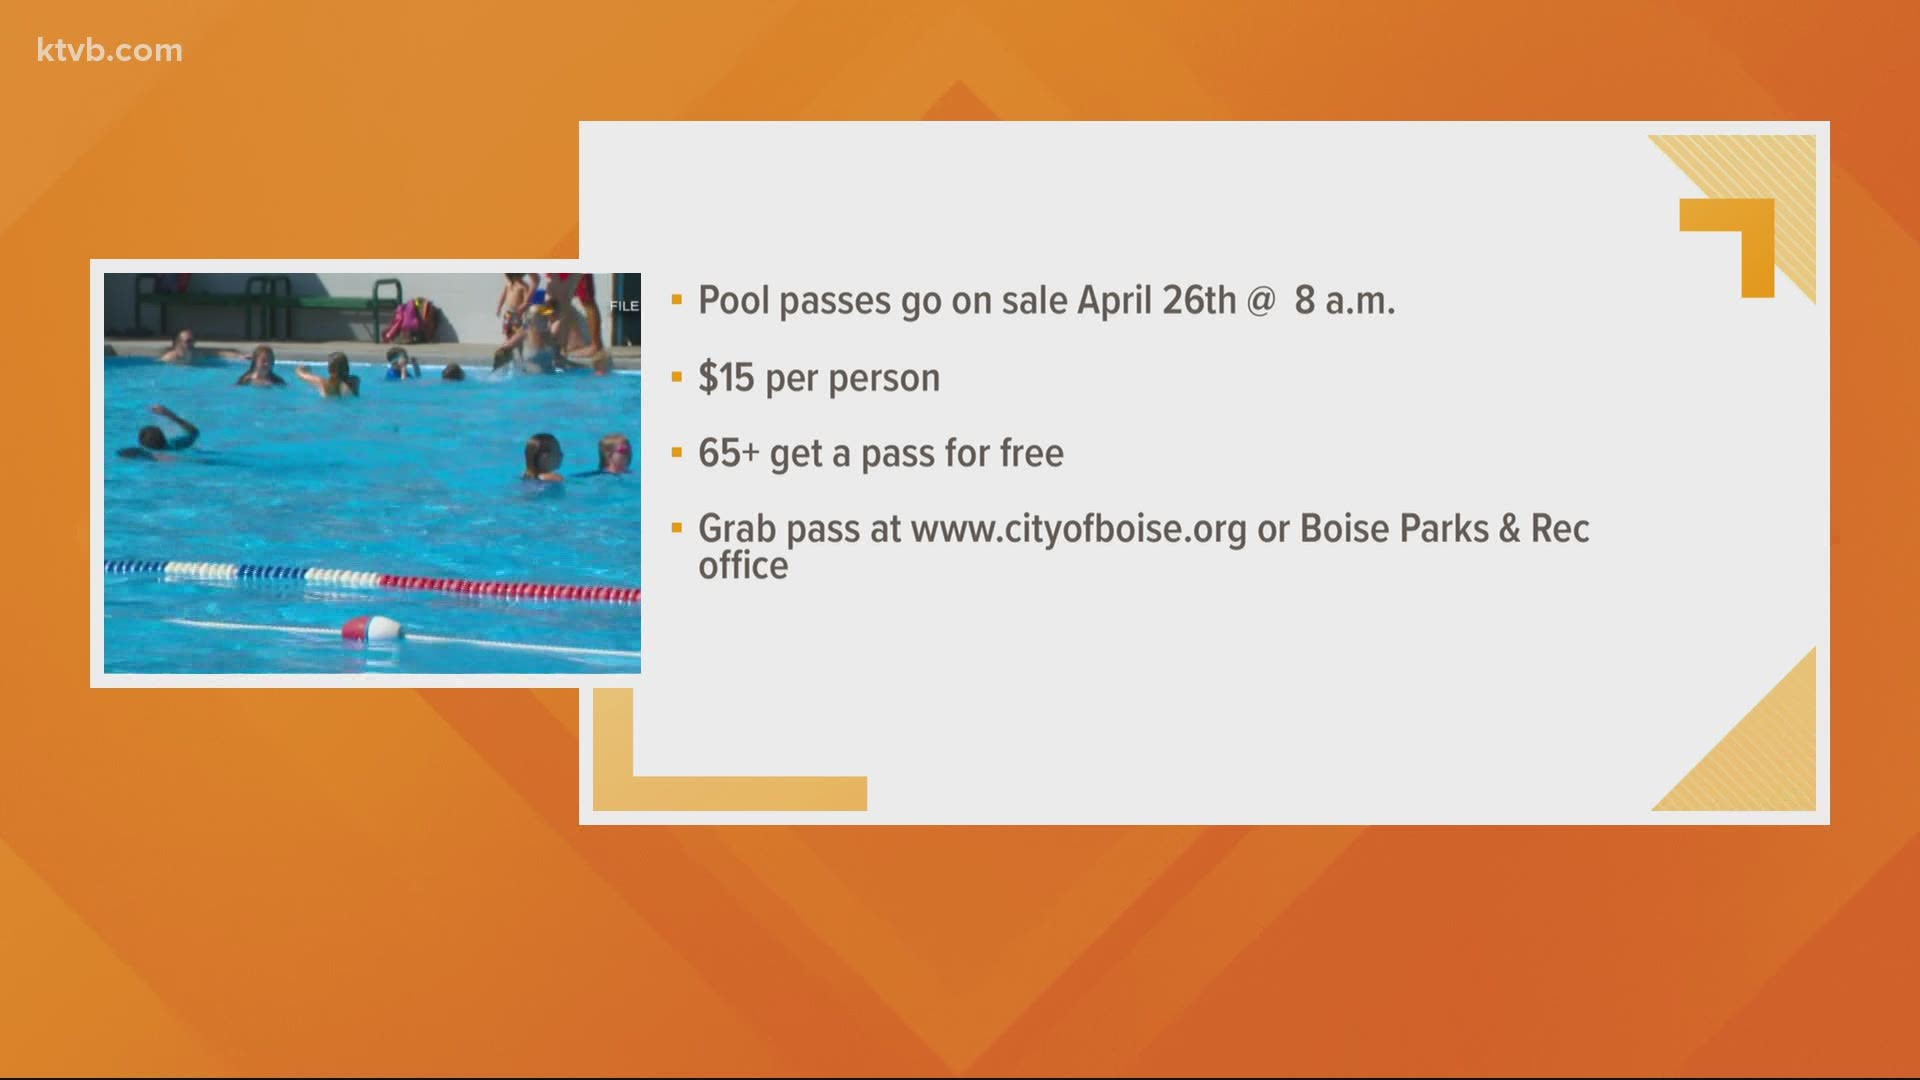 Boise Parks and Recreation says all pool visitors must have a season pass. The cost is $15 per person.